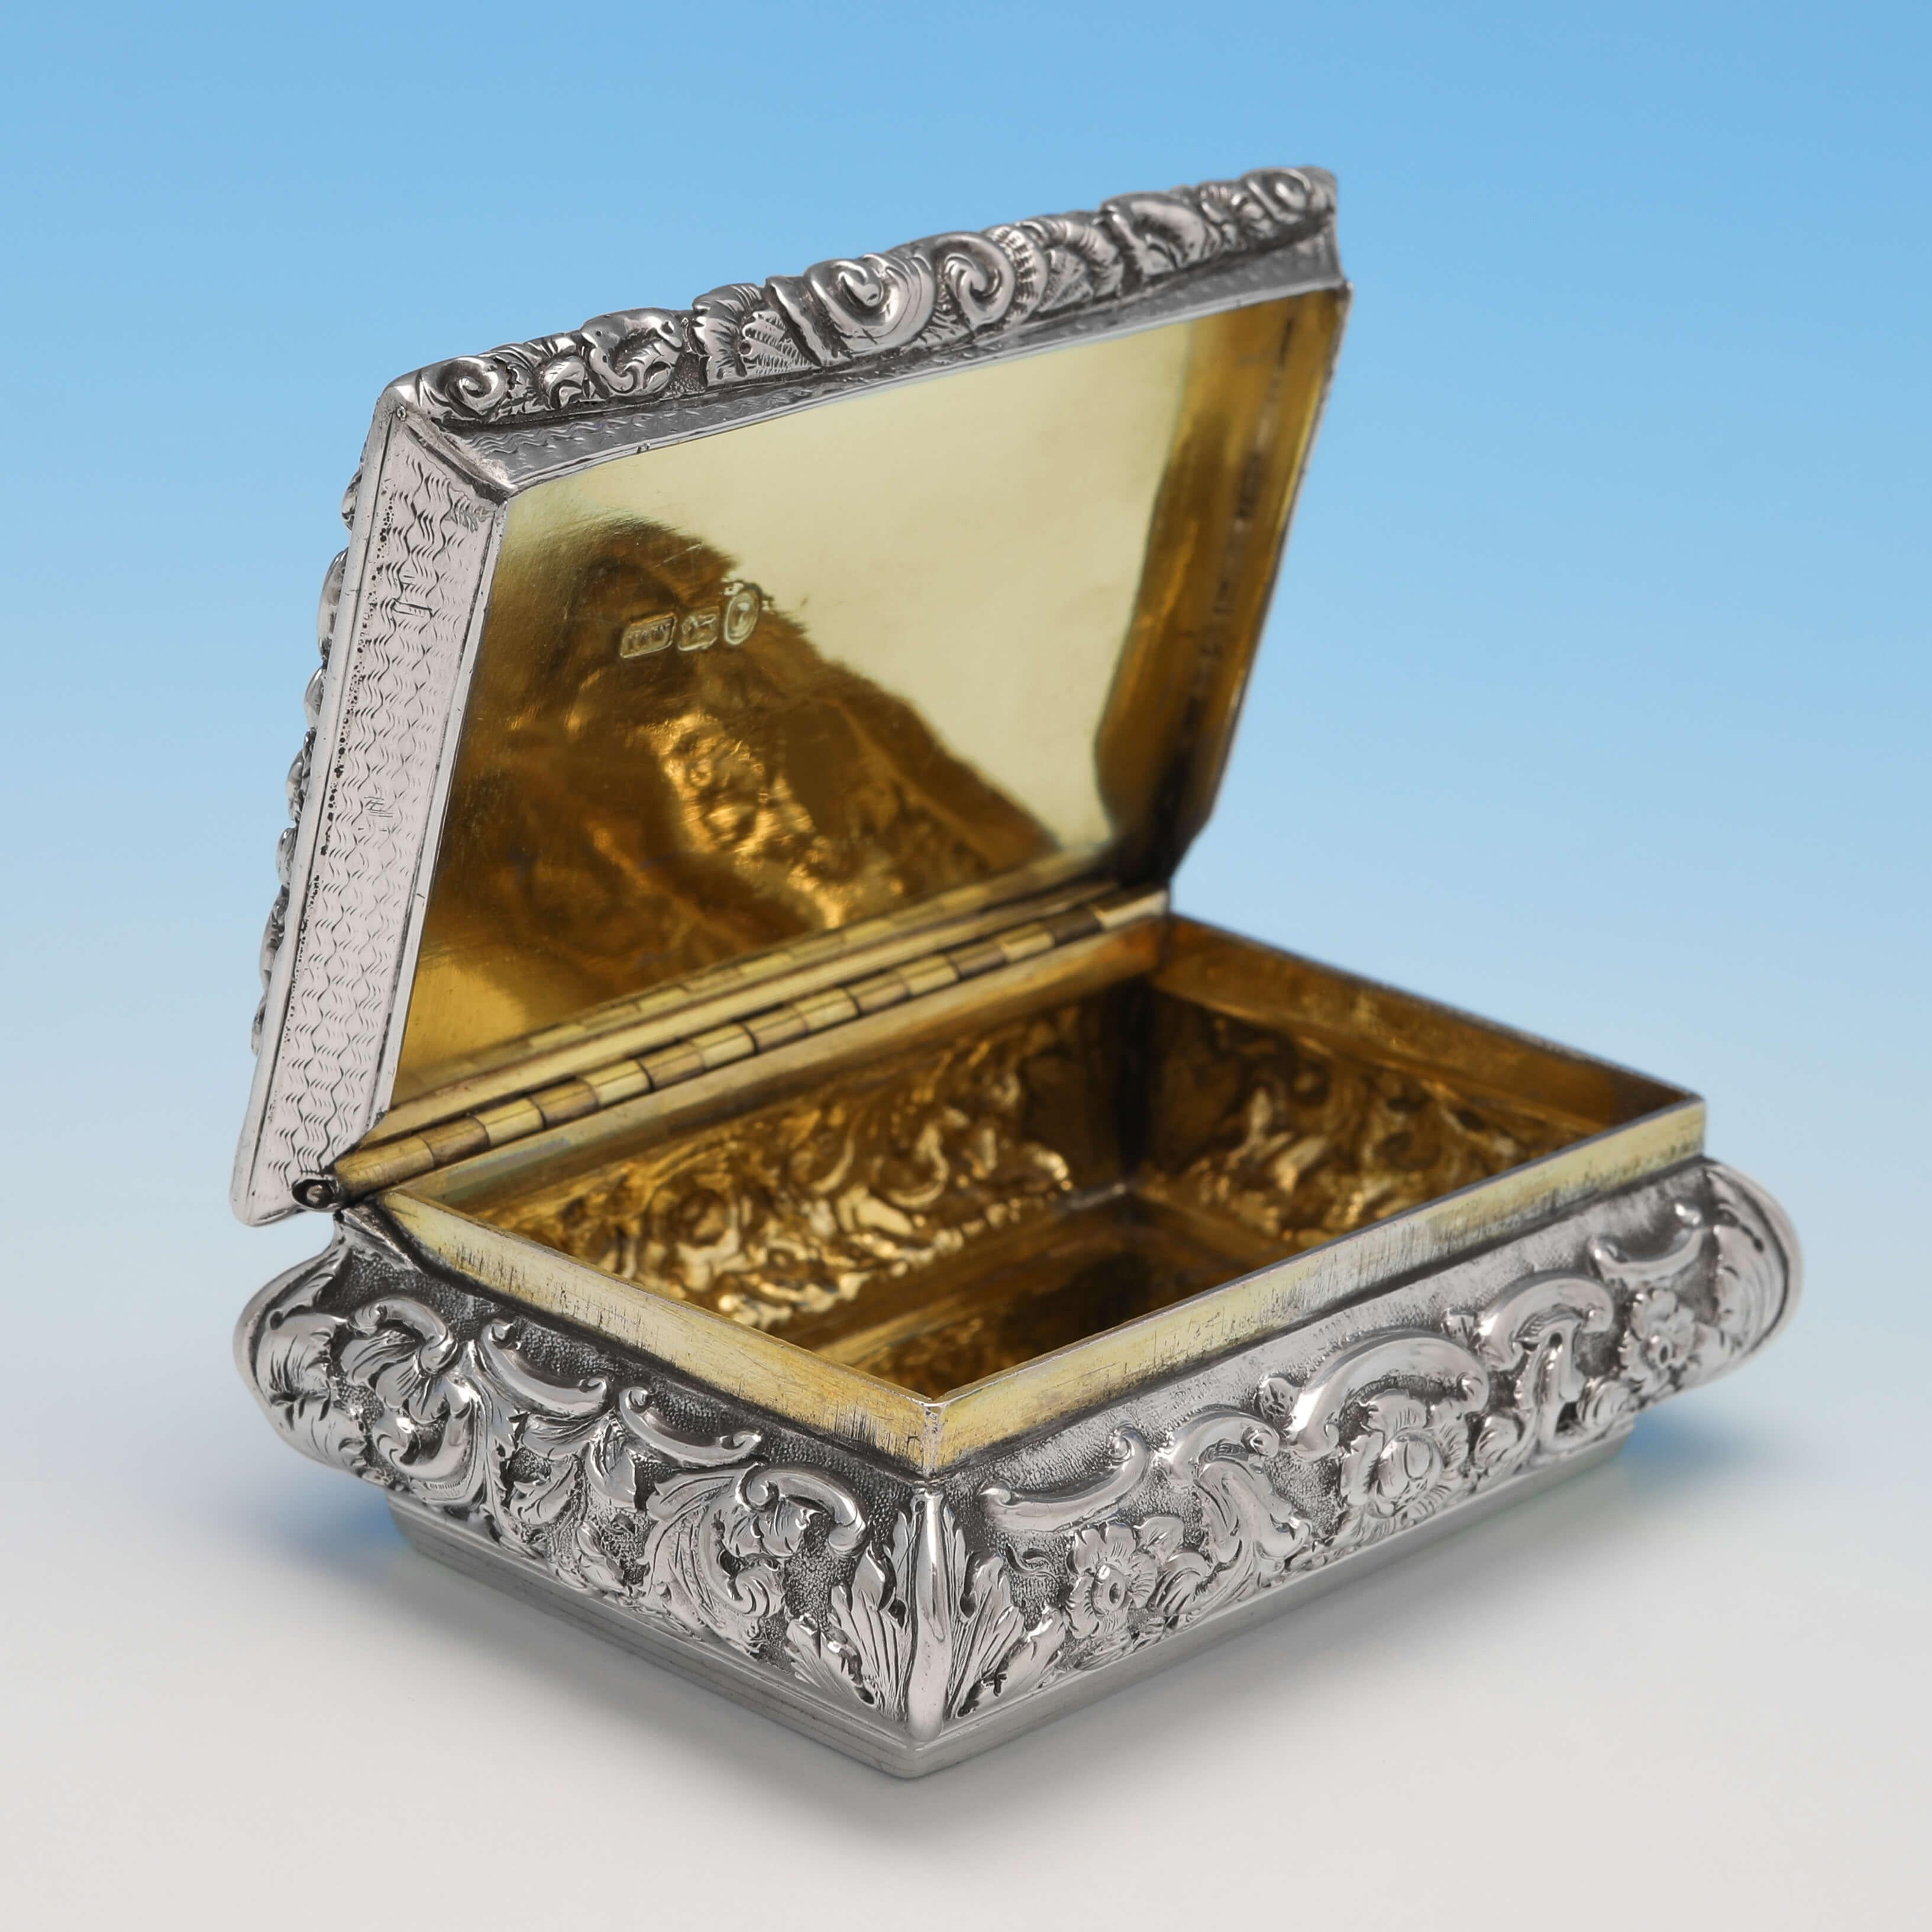 Hallmarked in Birmingham in 1845 by Yapp & Woodward, this attractive, Victorian, antique sterling silver snuff box, features cast floral borders and a gilt interior. The snuff box measures: 3.25